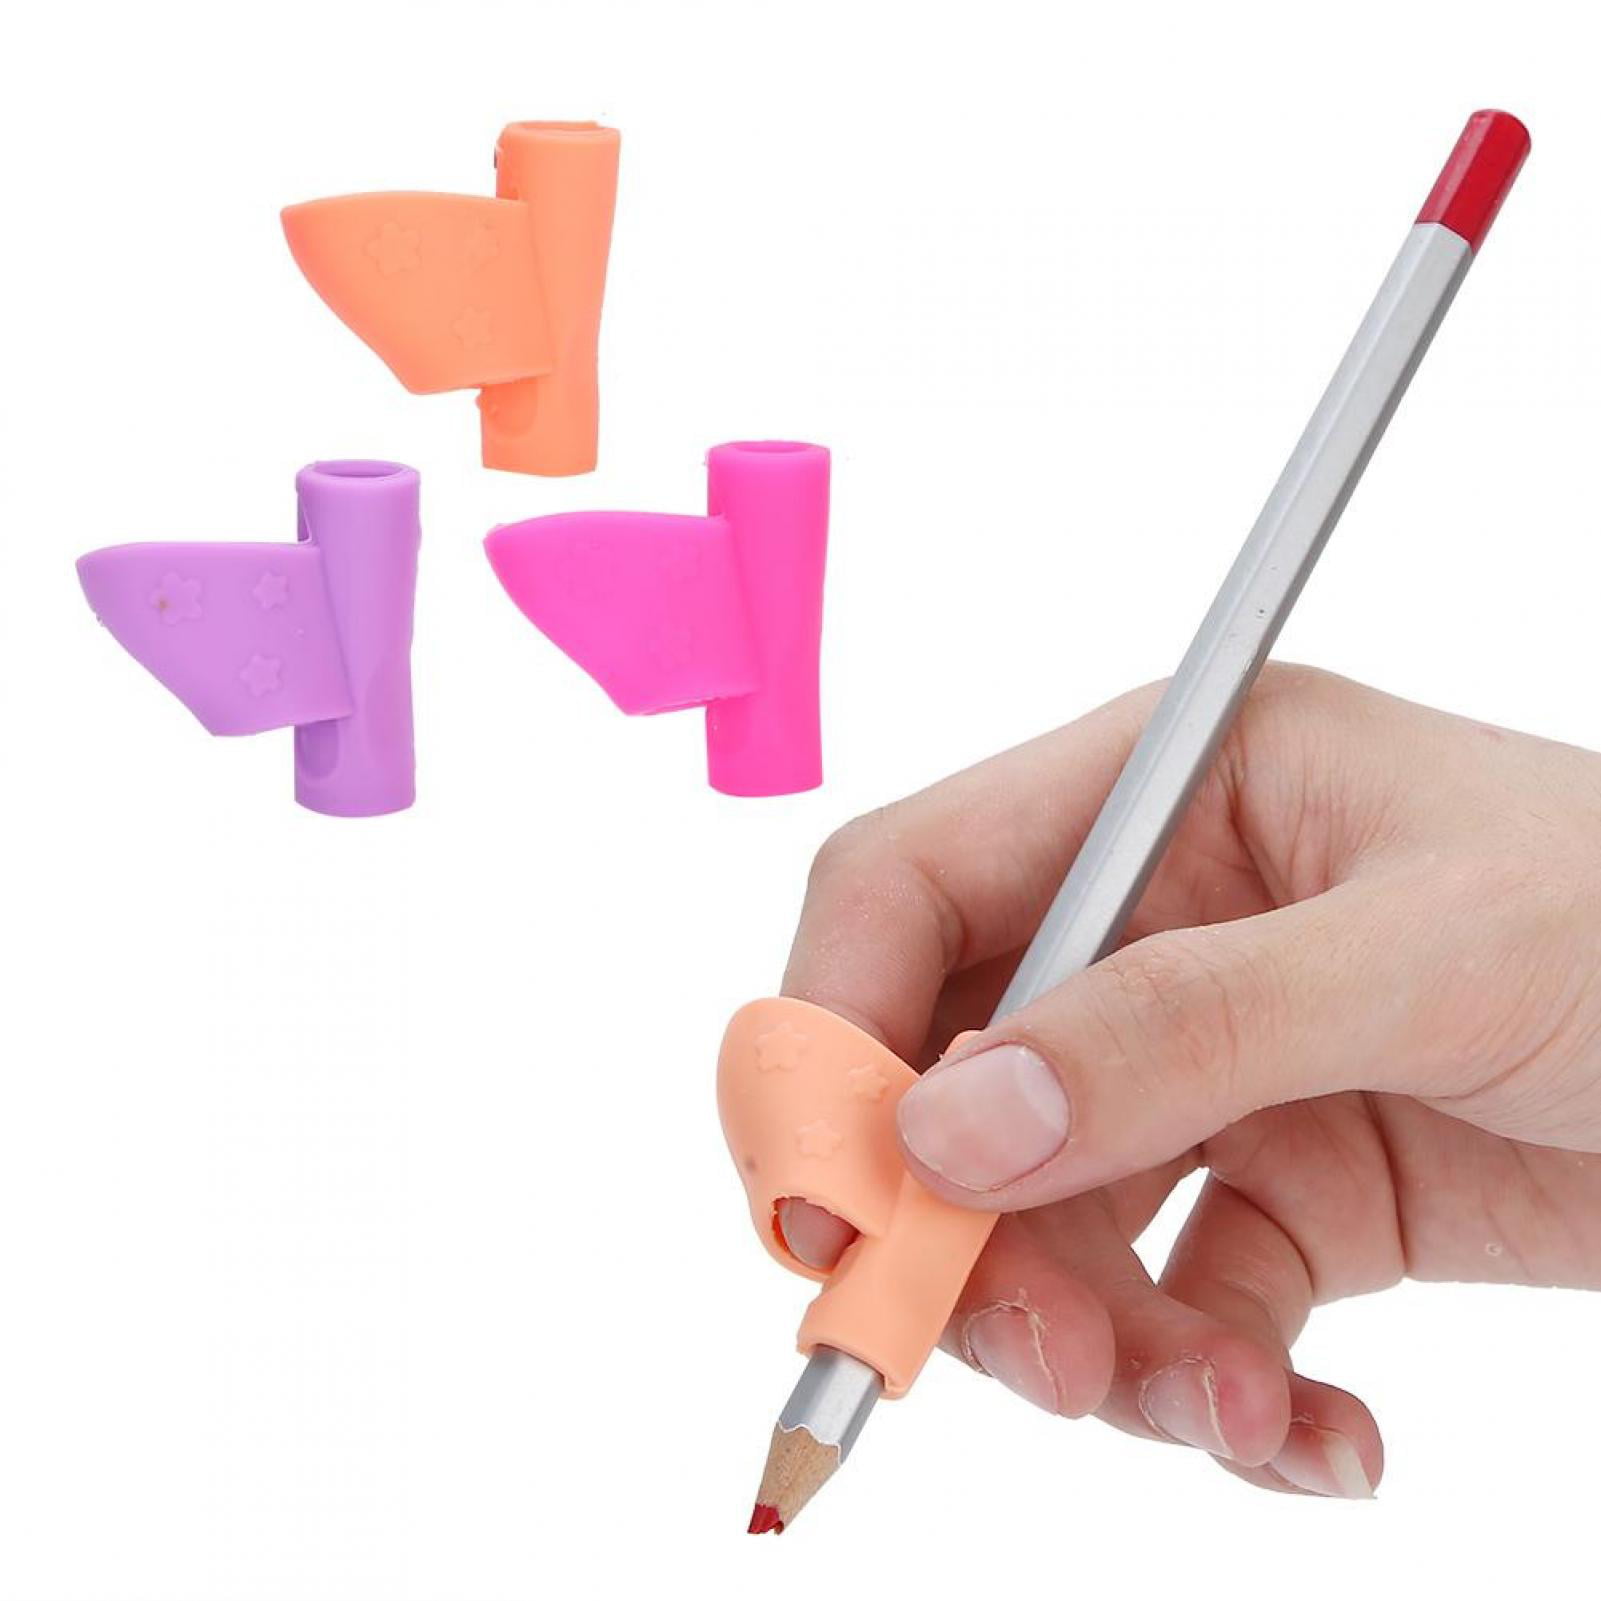 Silicone Pencil Grips Holder Ergonomic Pen Grippers Writing Aid For Kids Student 